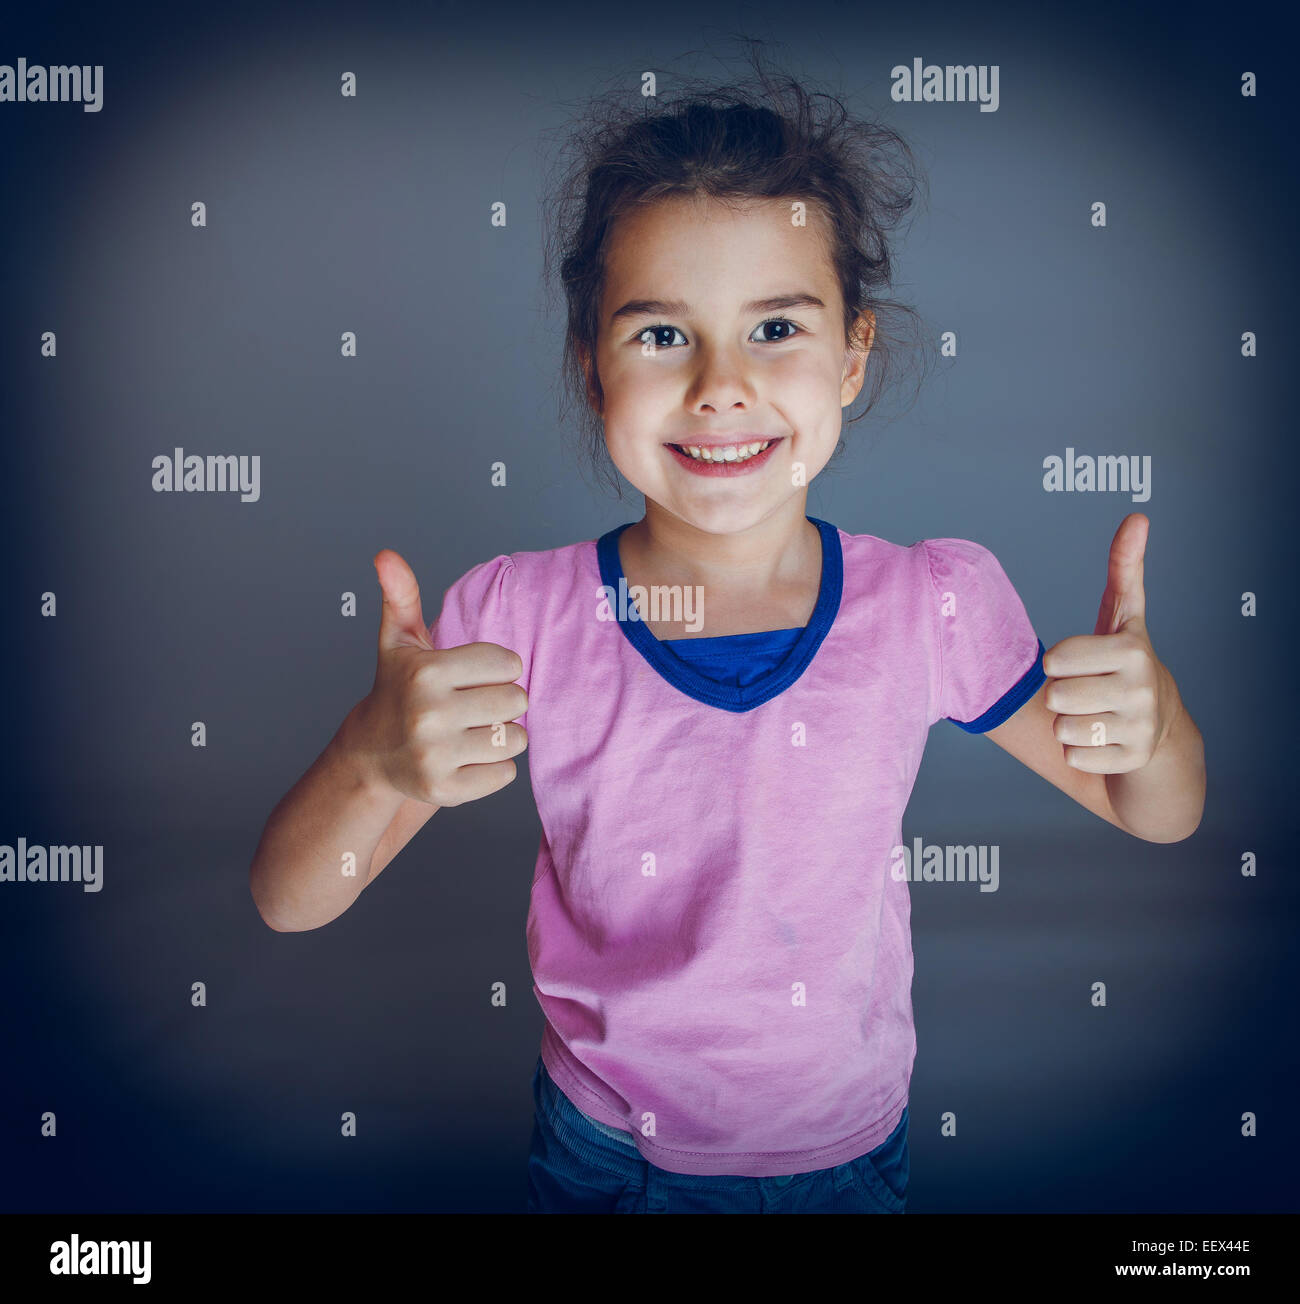 Teen girl shows gesture yes on gray background cross process Stock Photo